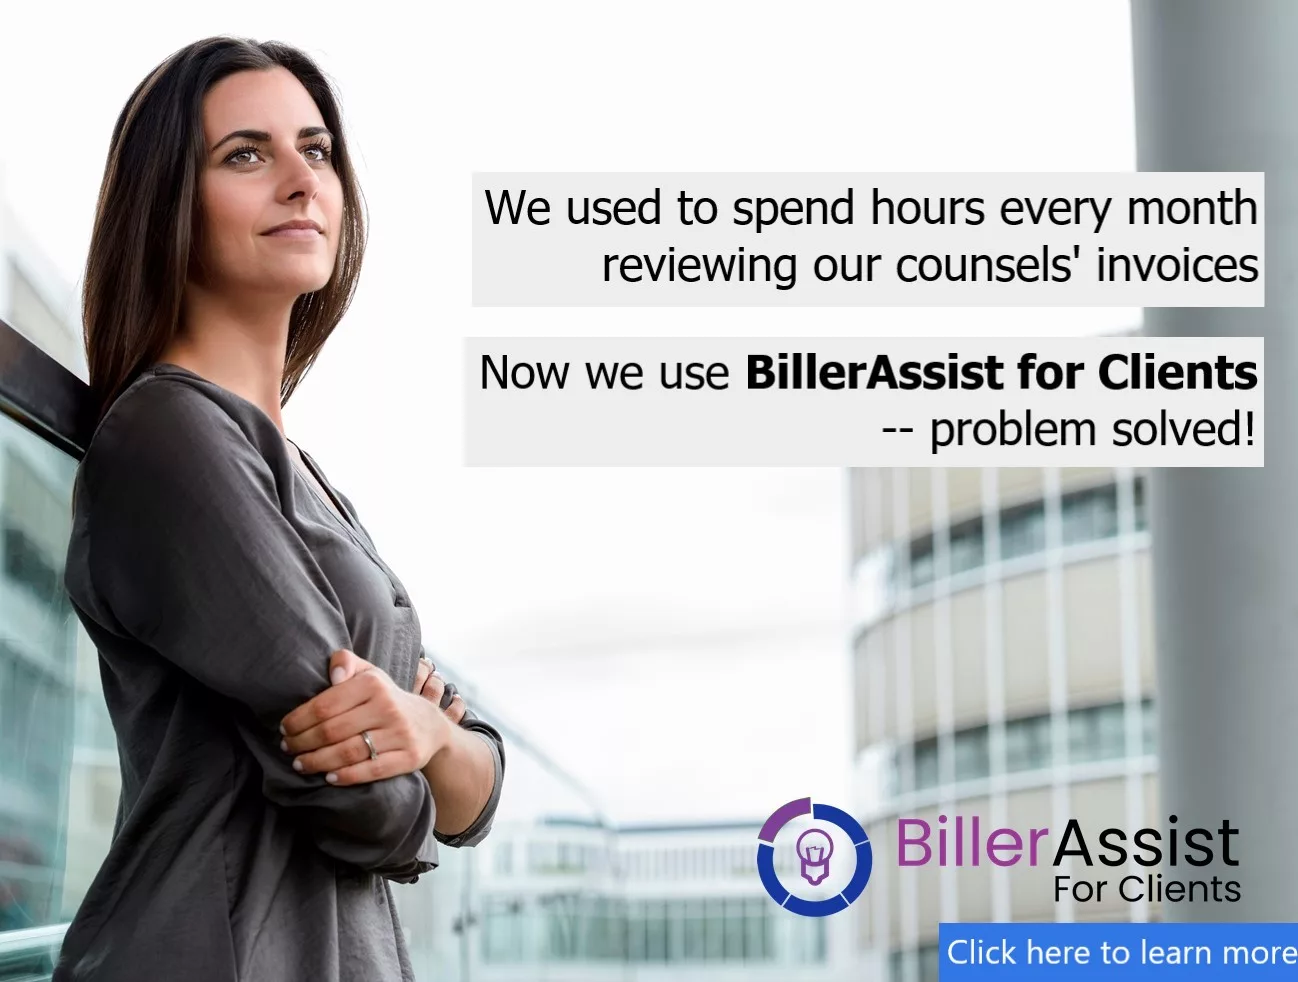 How To Optimize Legal Spend Management with BillerAssist for Clients